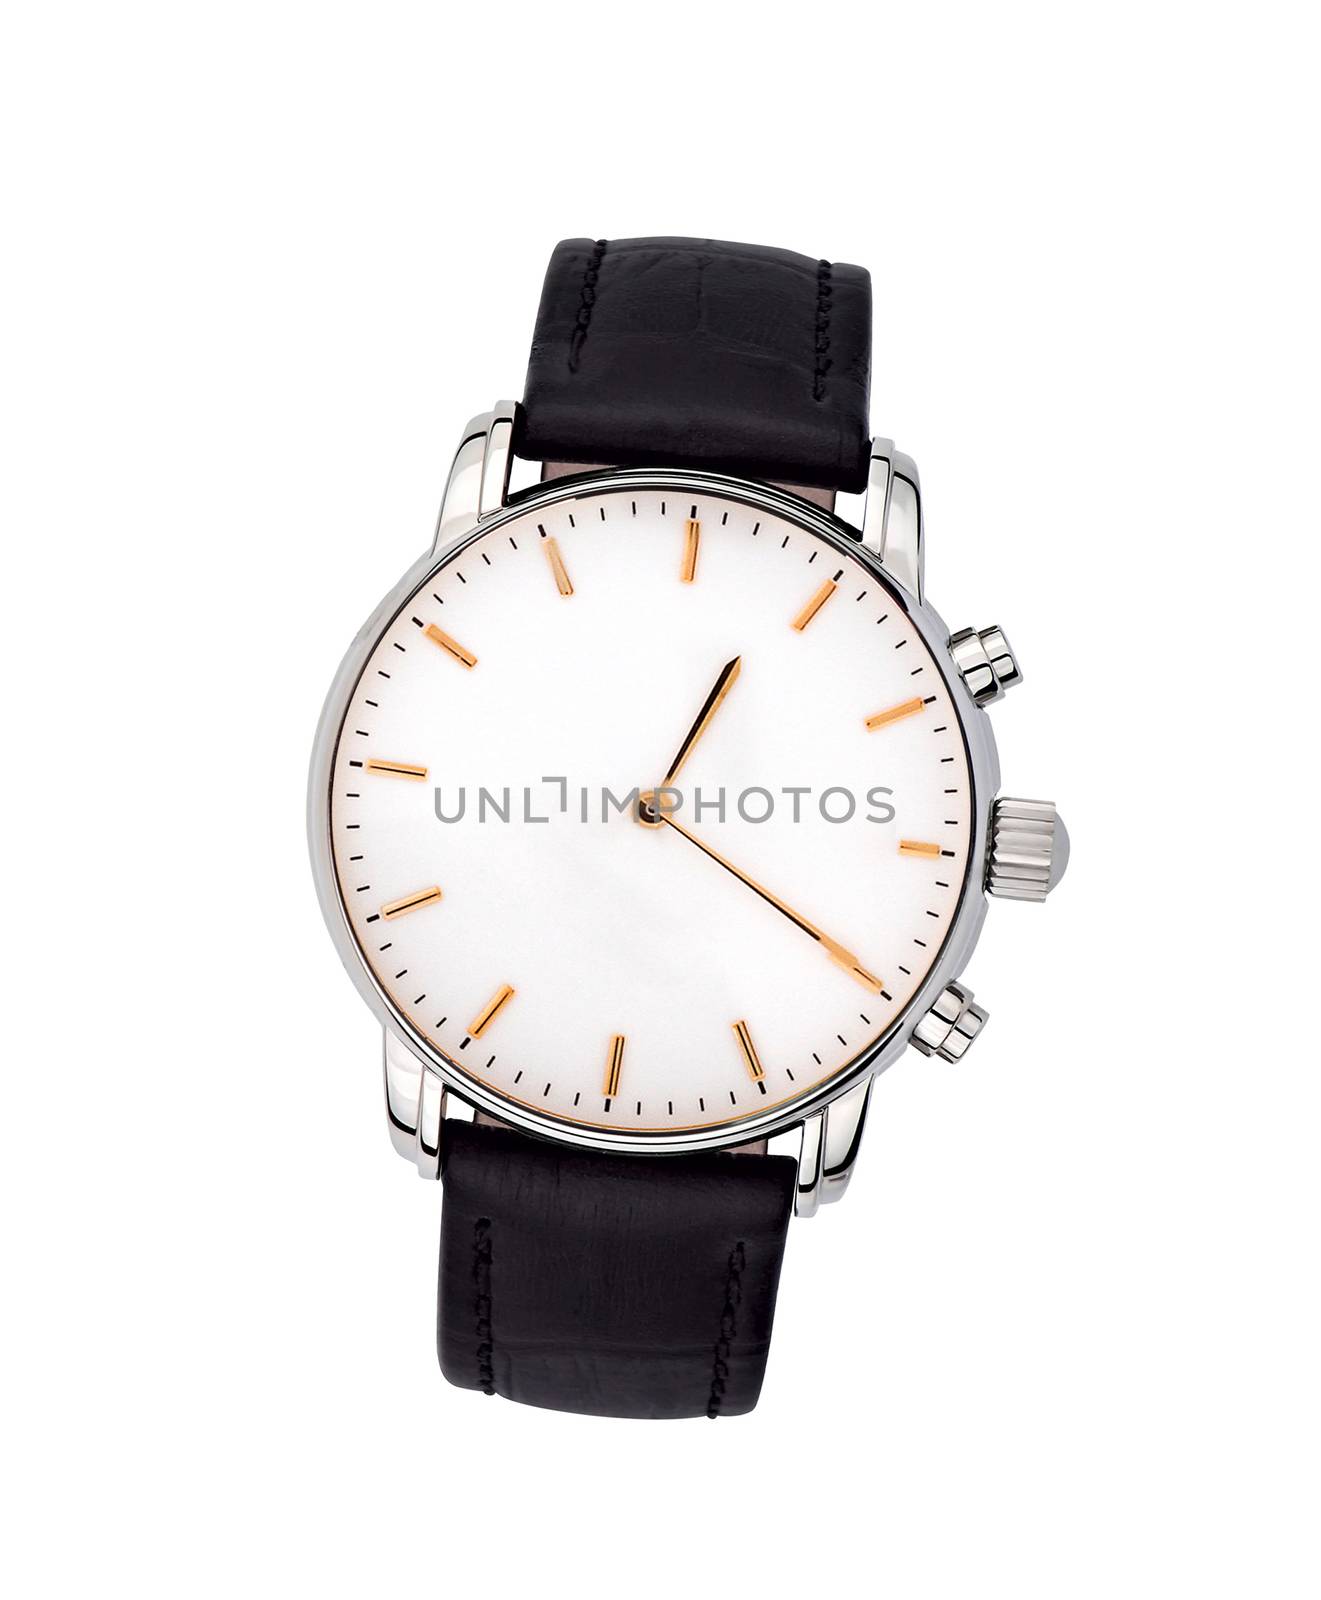 watches on white background